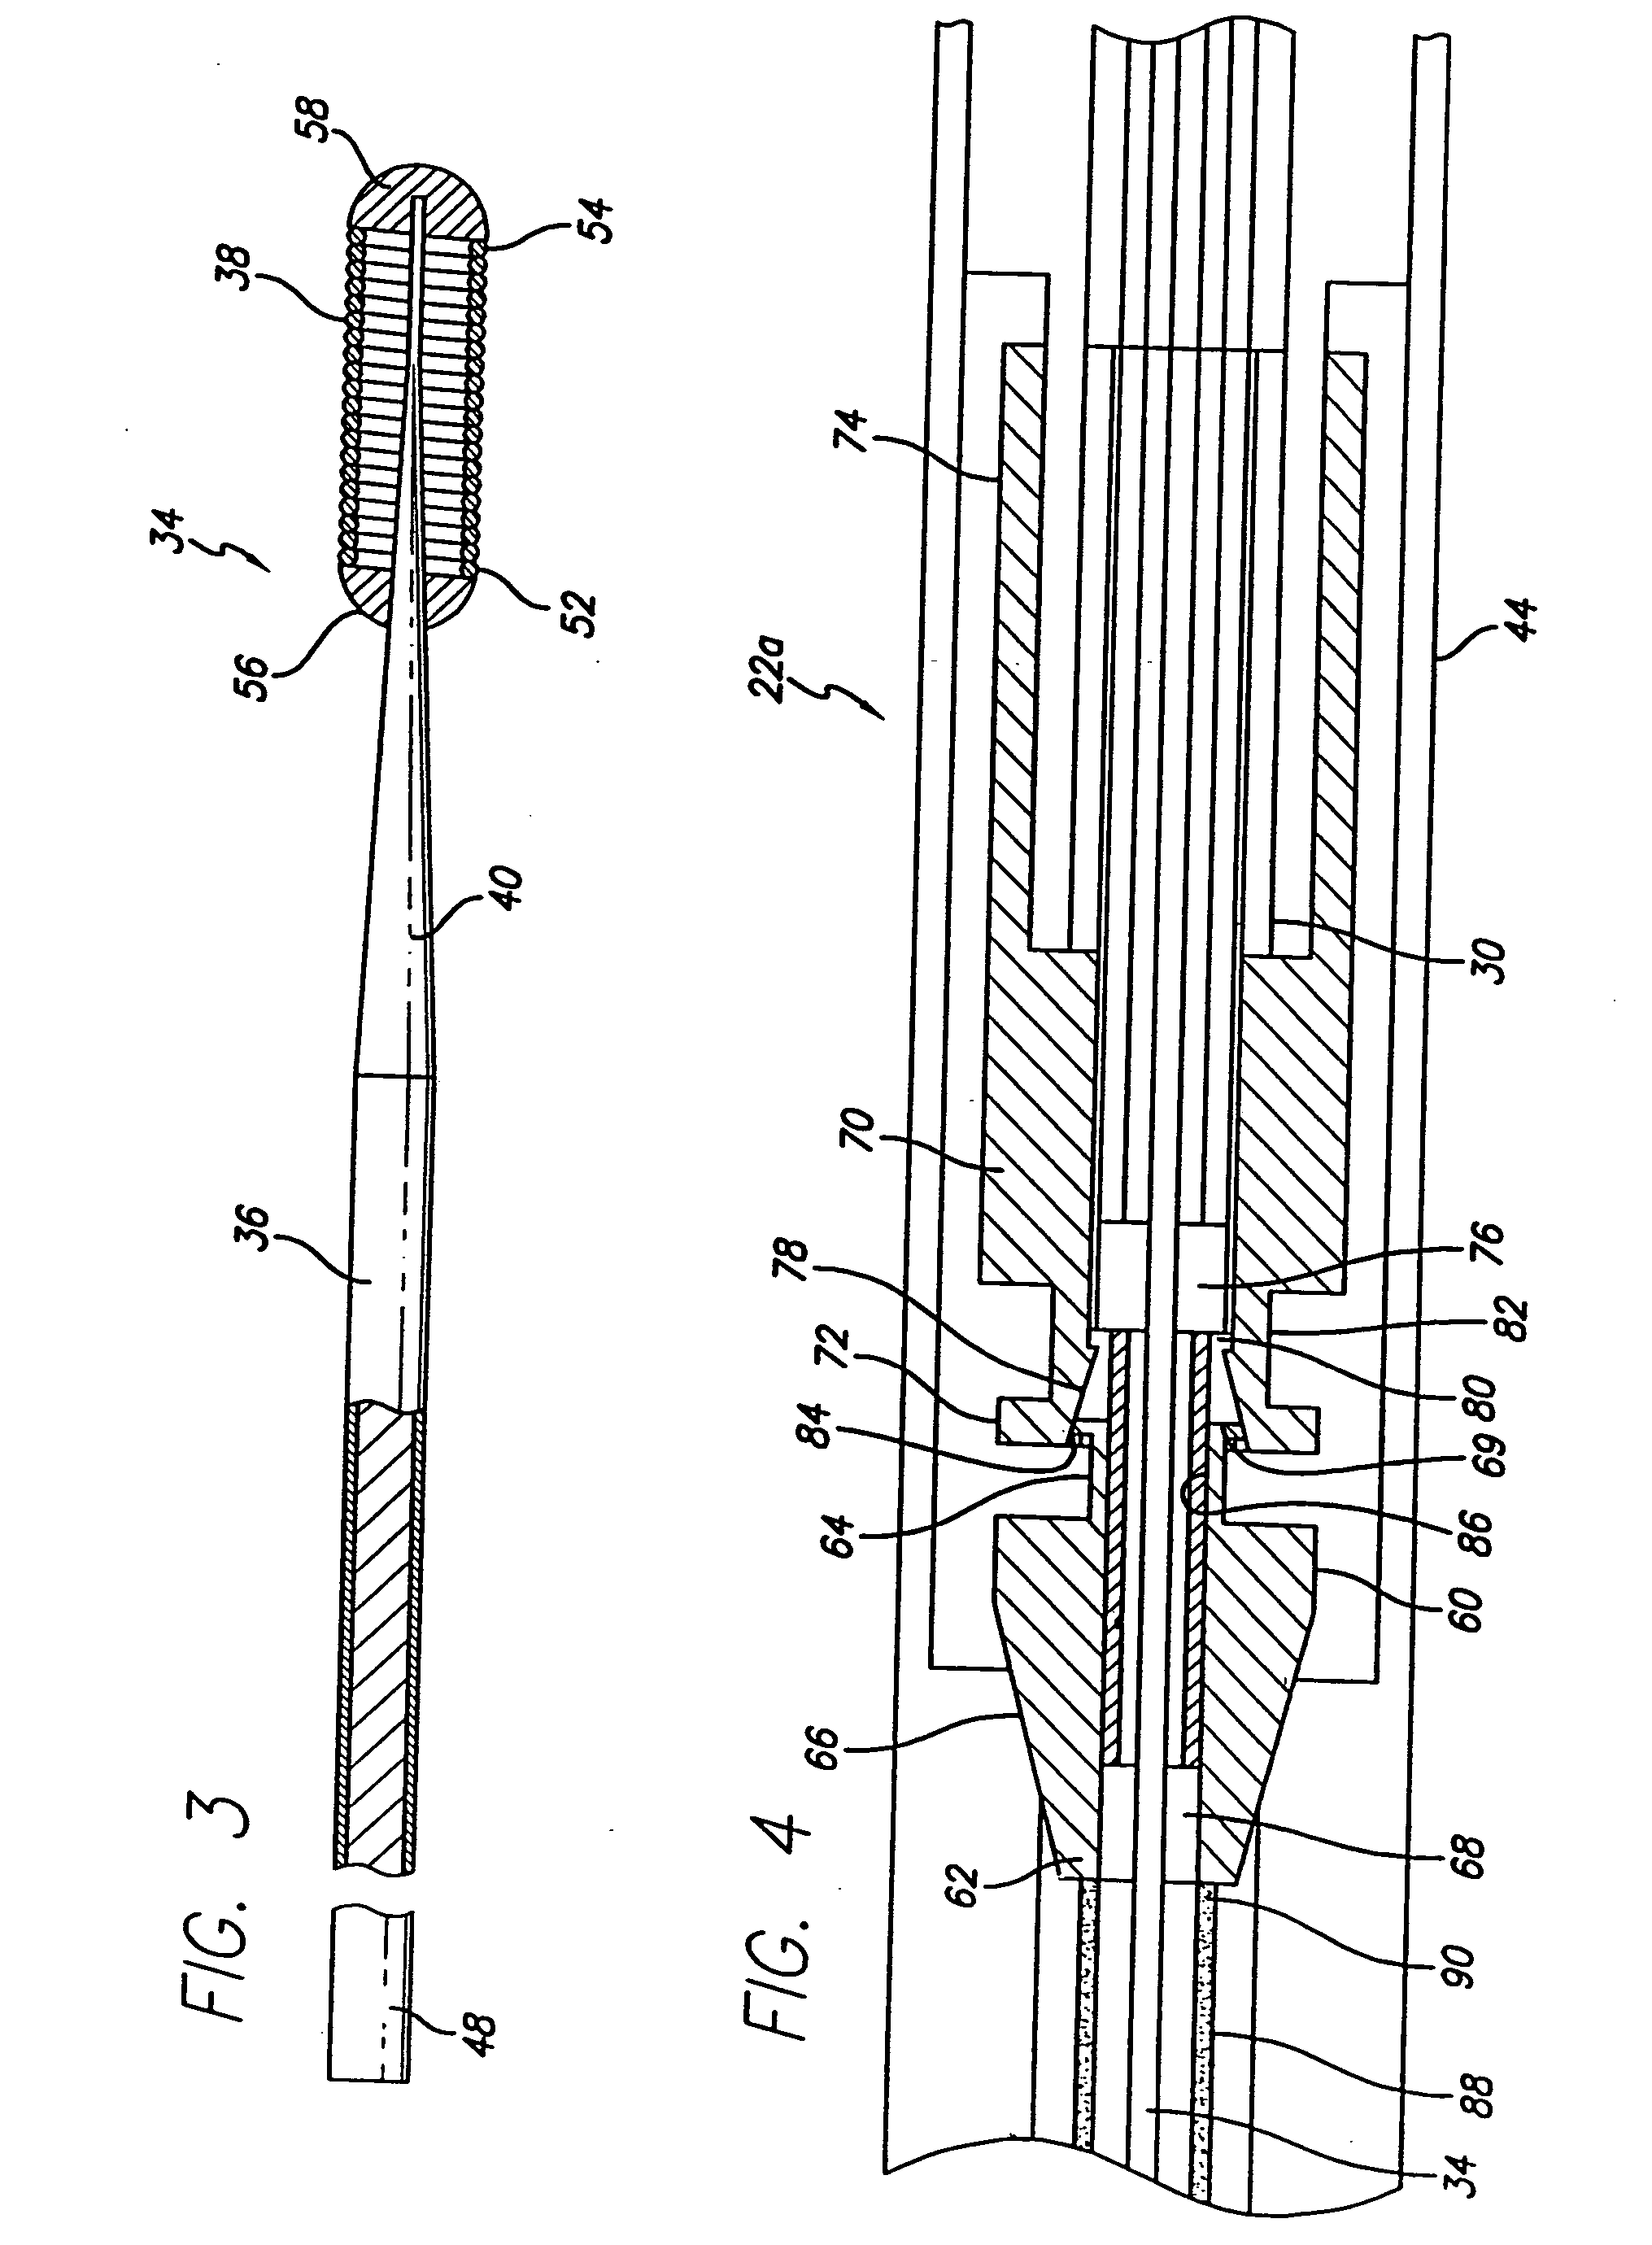 Locking component for an embolic filter assembly